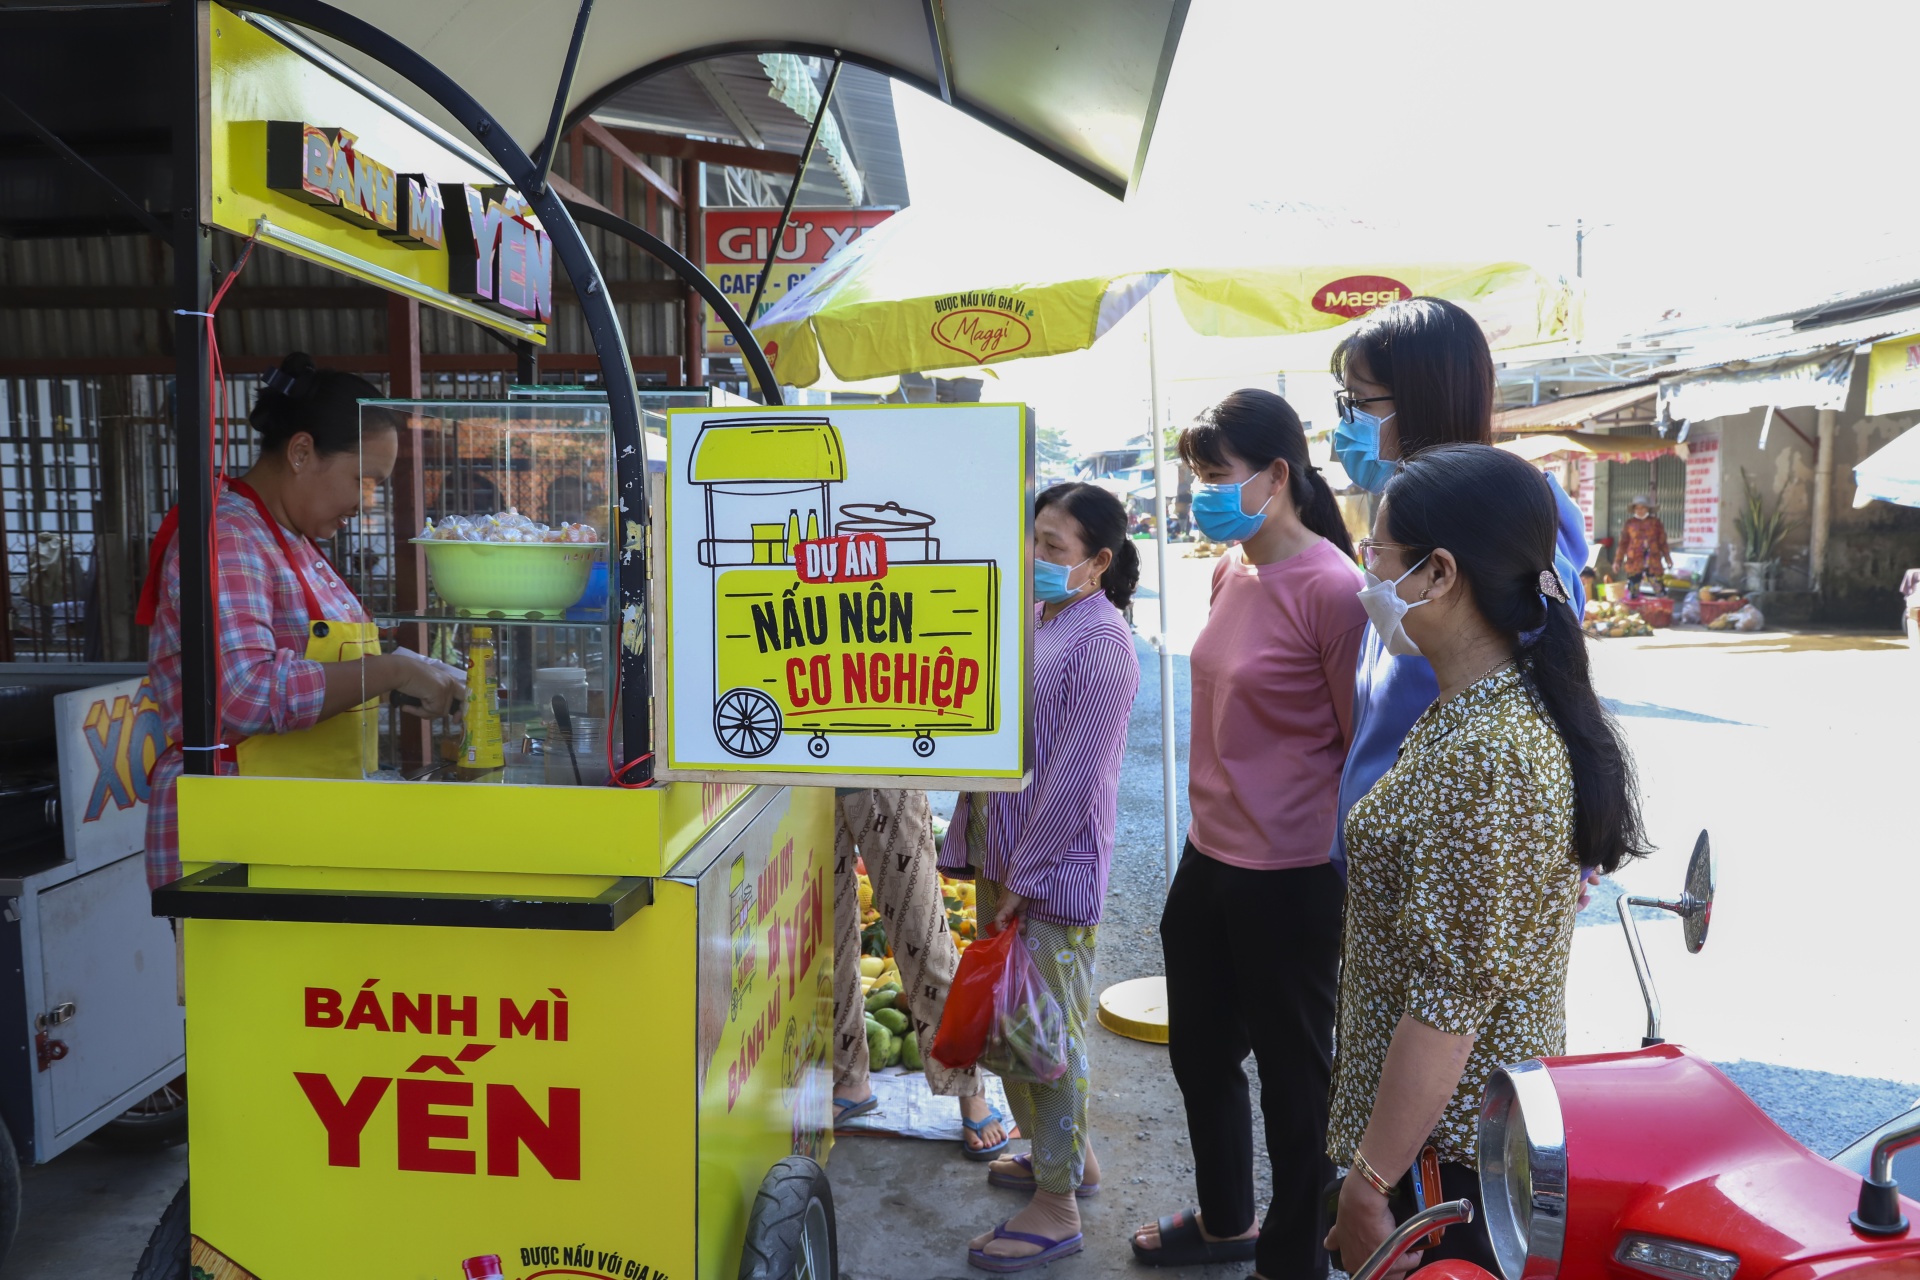 Nestlé and Maggi campaign goes from strength to strength